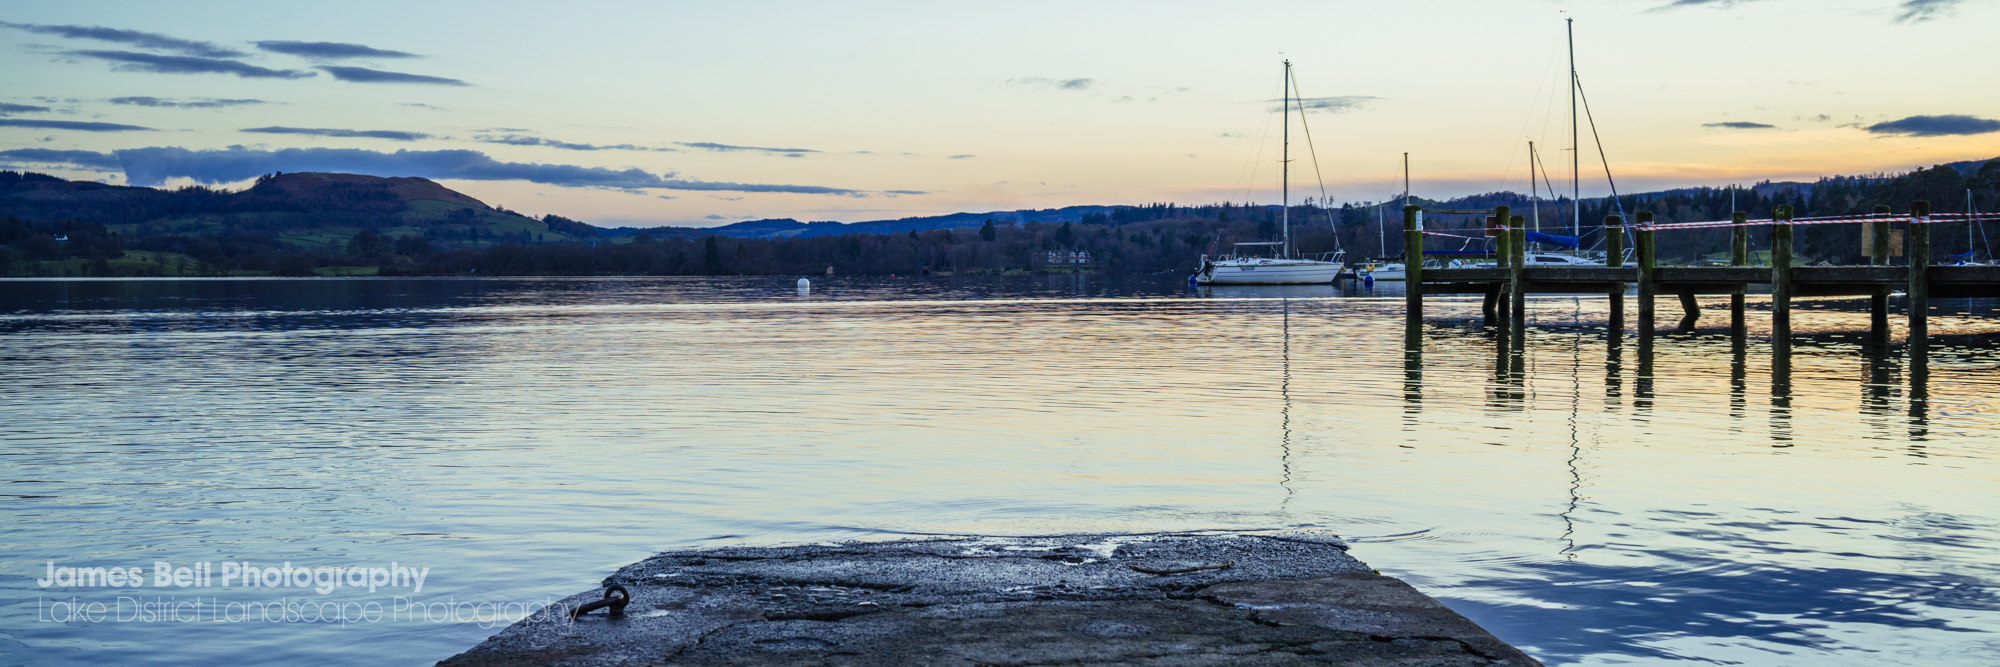 Windermere Sunset Print for sale (1)